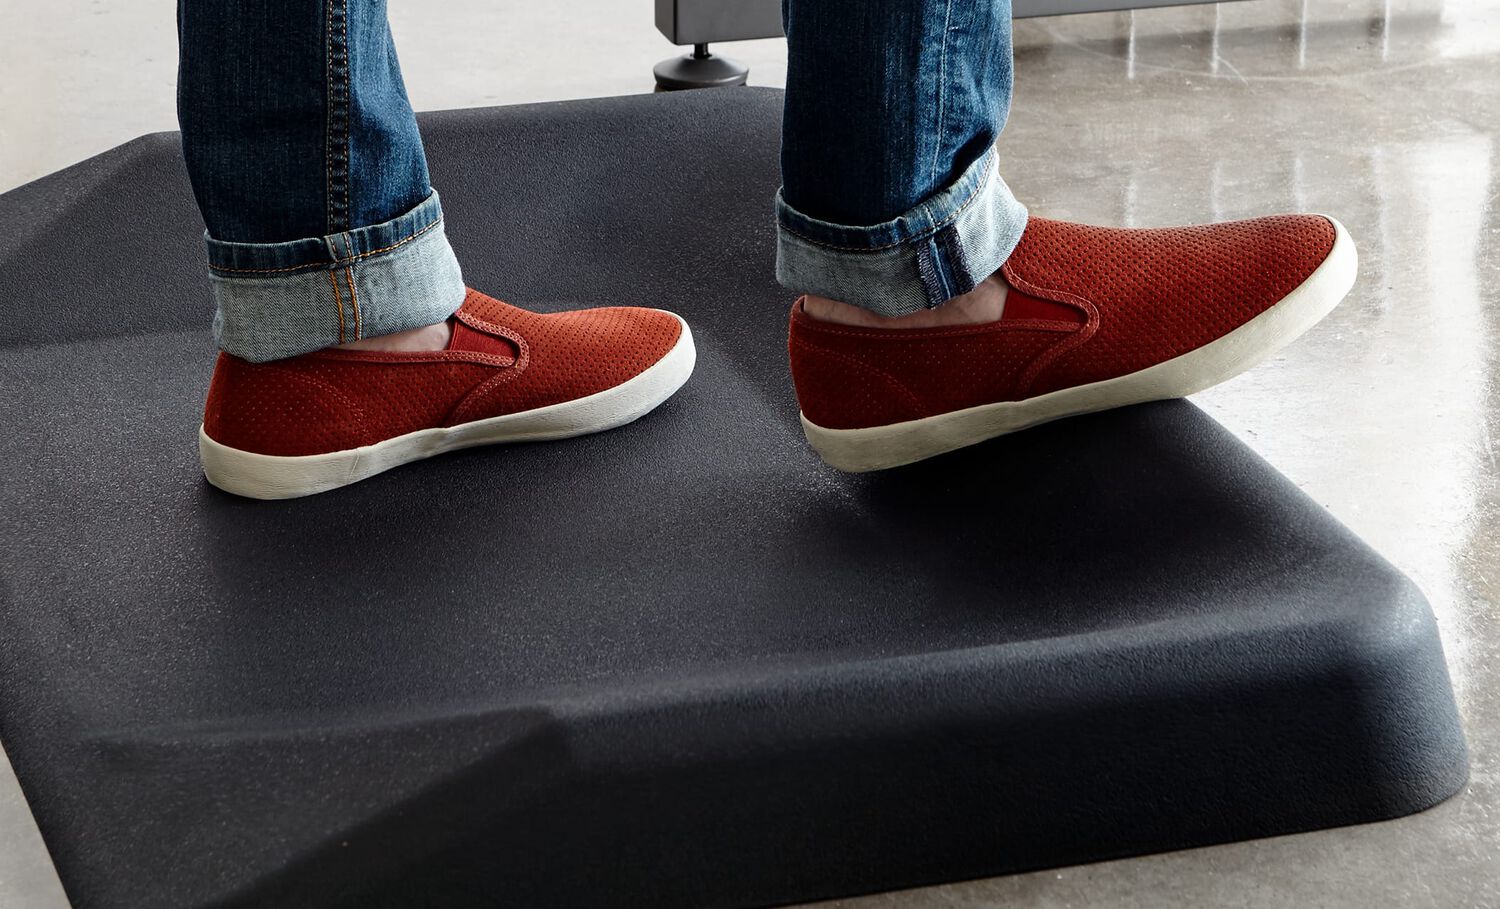 The ActiveMat™ - A Standing Mat that encourages movement by VARIDESK® -  Sandbox